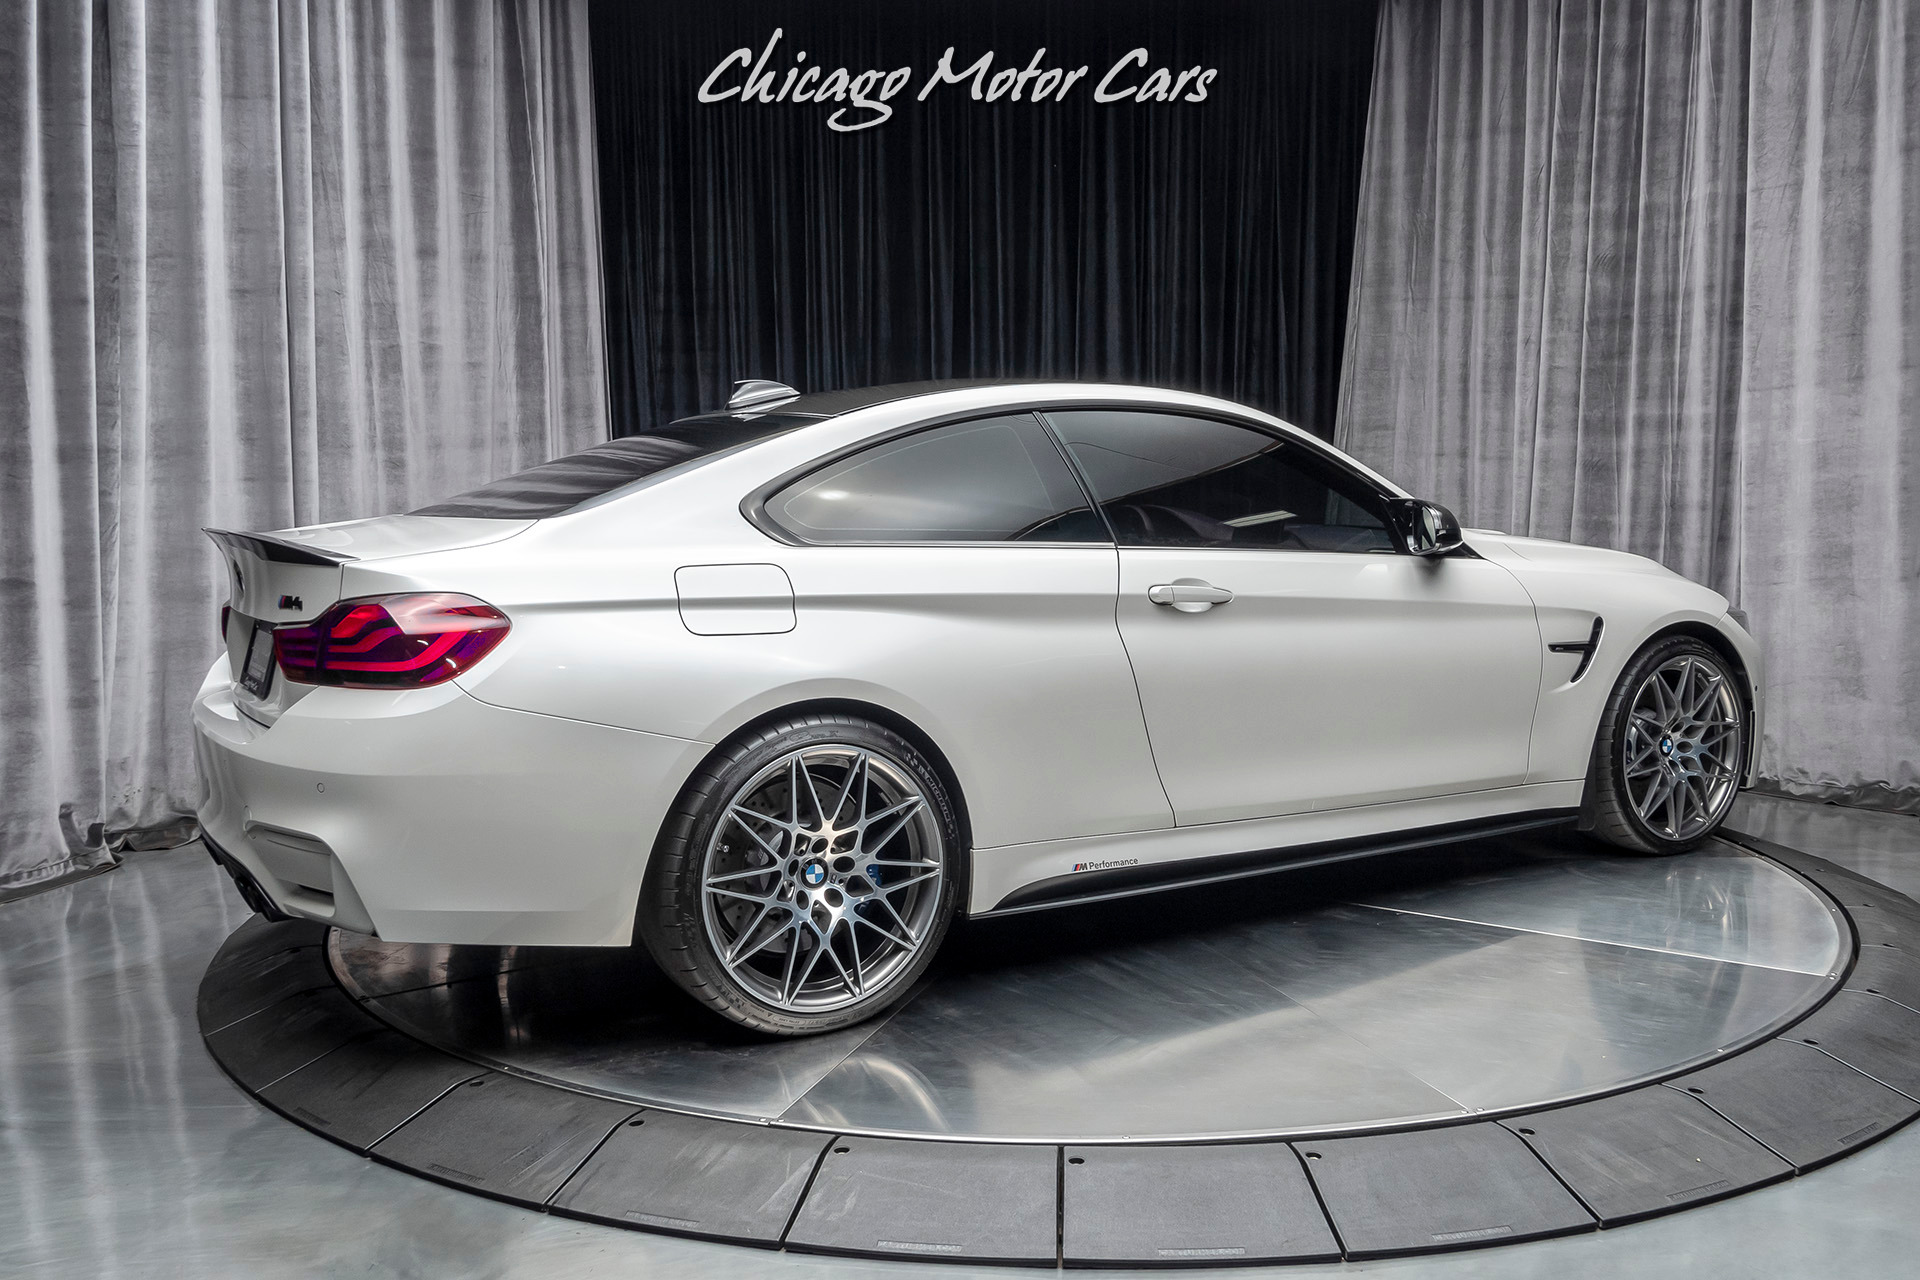 Used-2017-BMW-M4-Competition-Pkg-Serviced-RARE-6-Speed-Manual-M-Performance-Upgrades